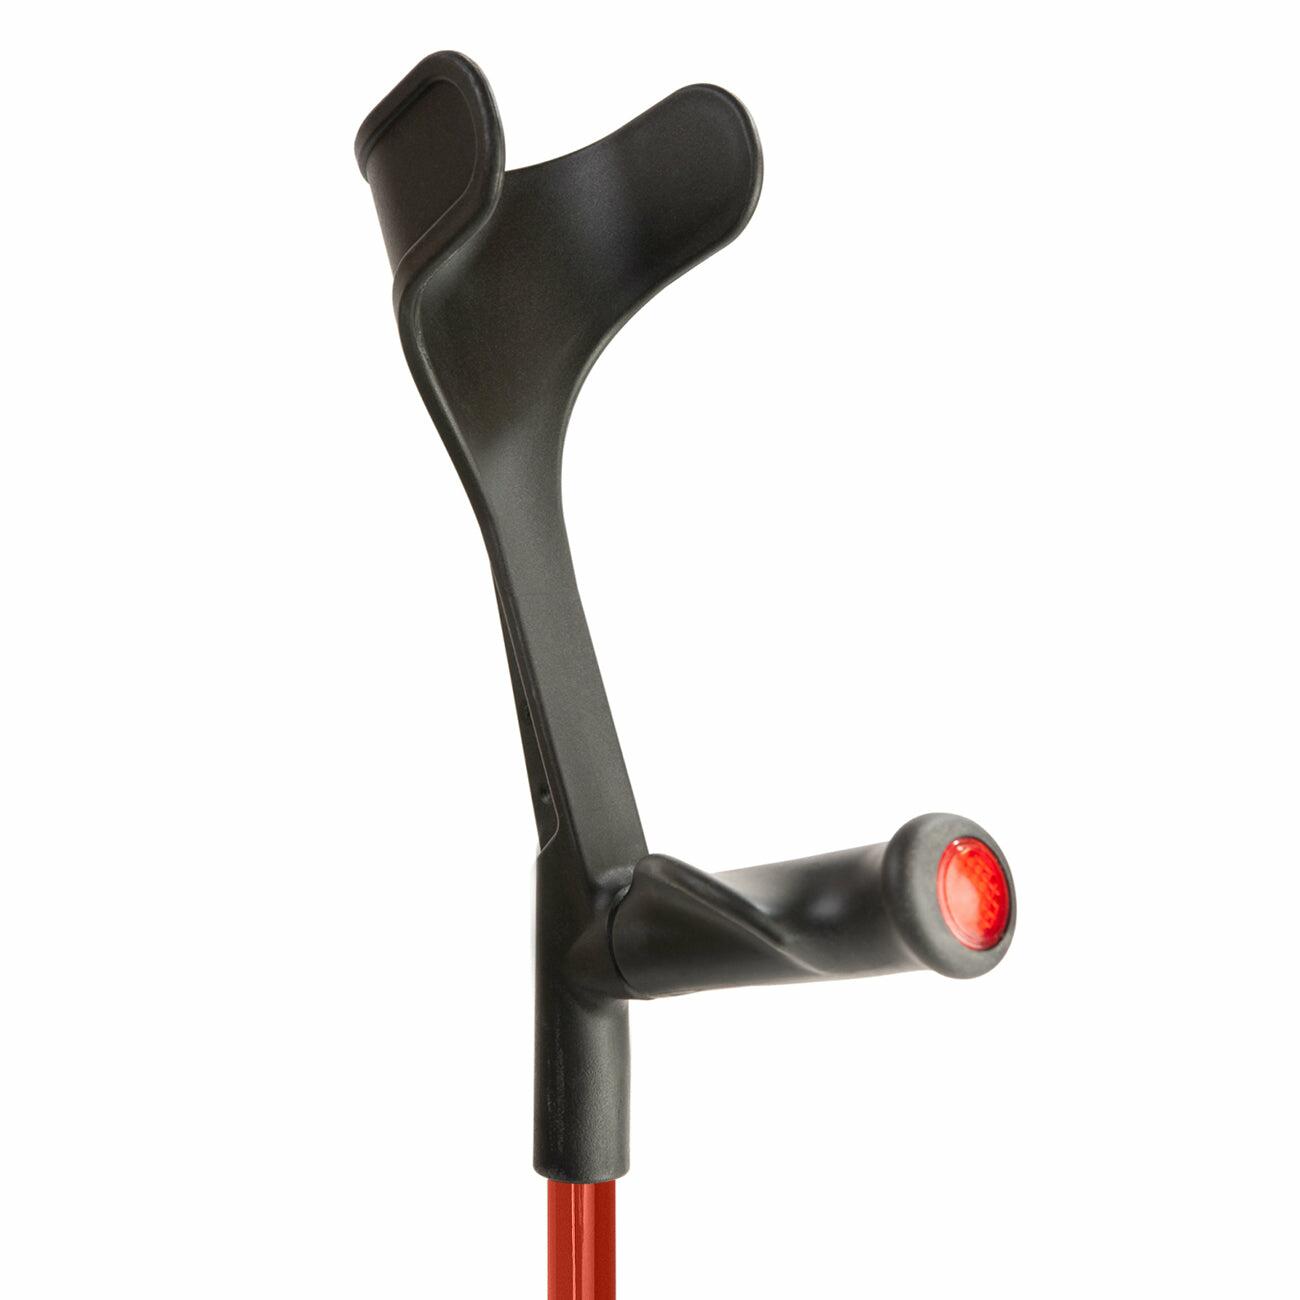 Comfort grip handle and open cuff of a red Flexyfoot Comfort Grip Open Cuff Crutch